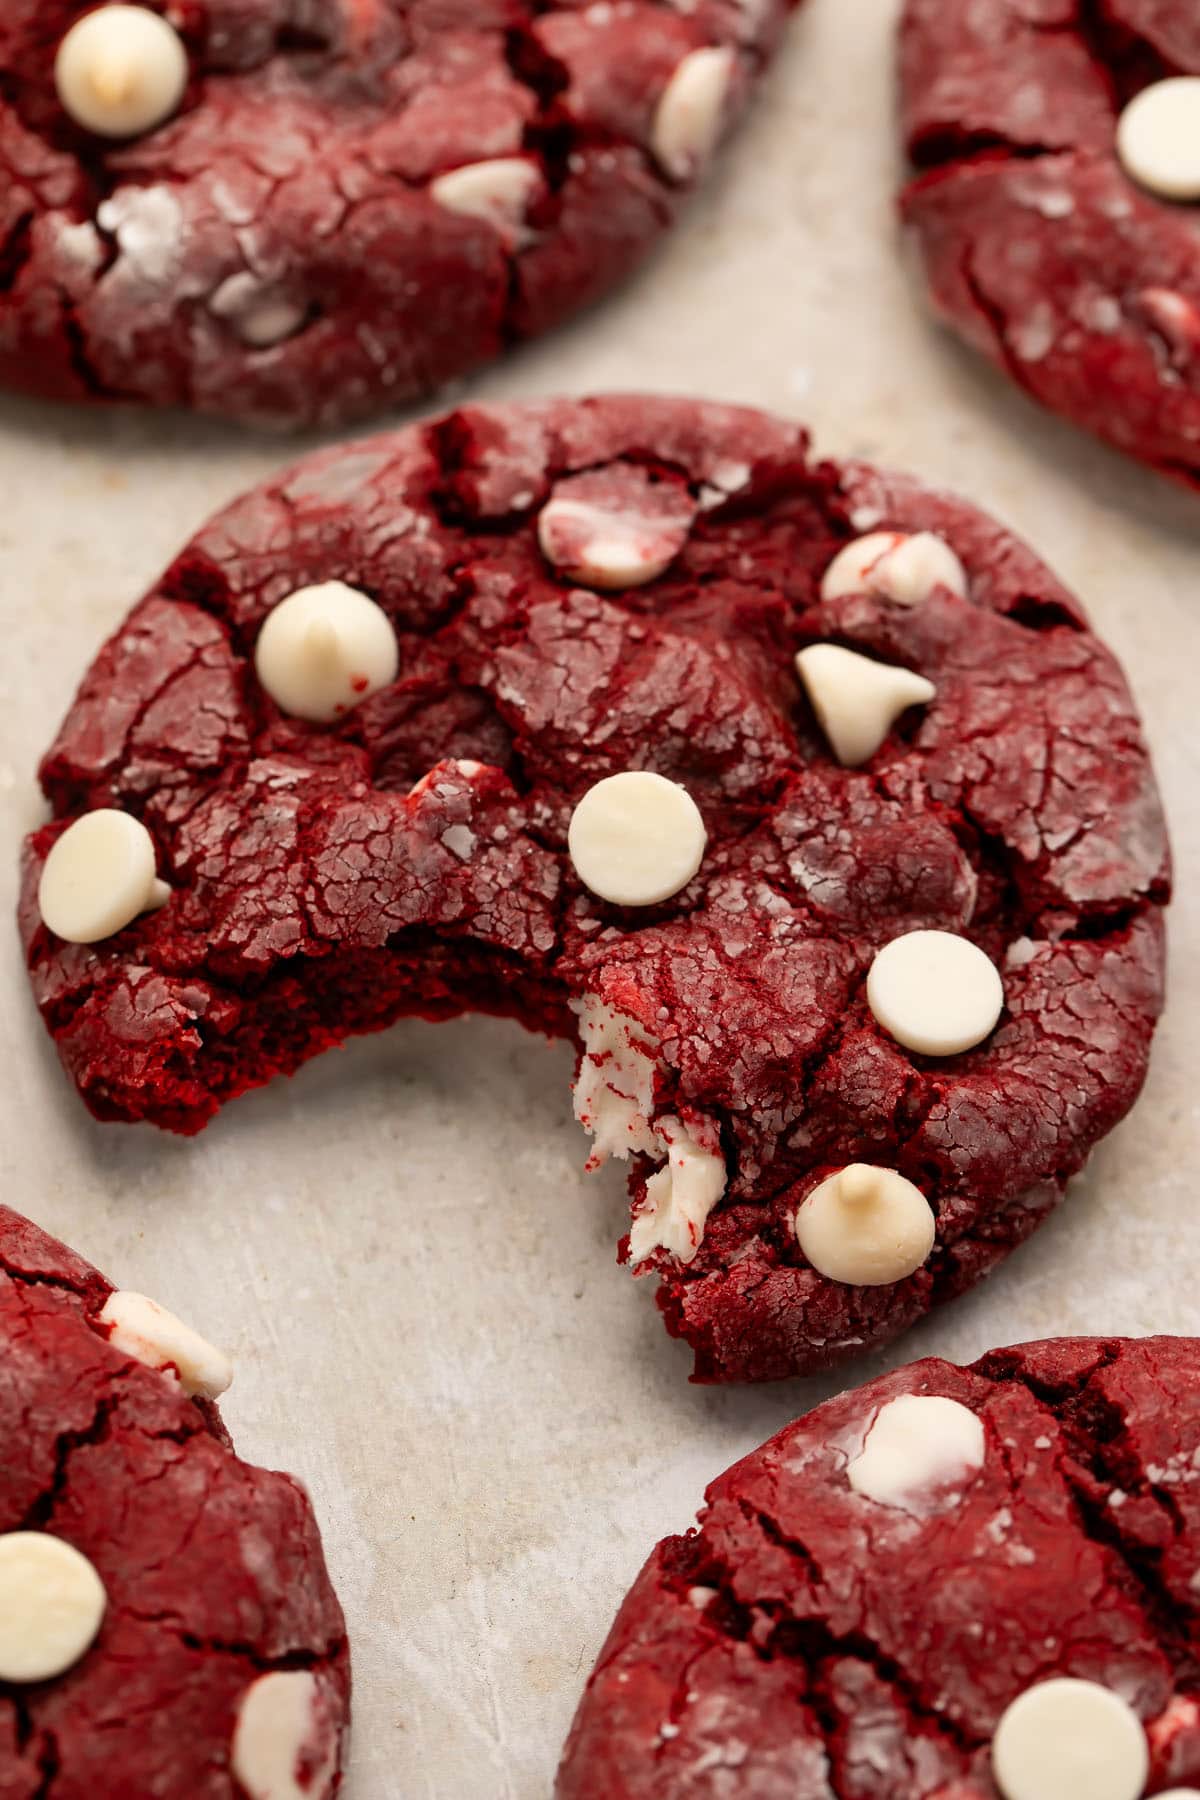 A crinkly, soft red velvet cake mix cookie dotted with white chocolate chips on a sheet of parchment paper. One bite has been taken out of the cookie.